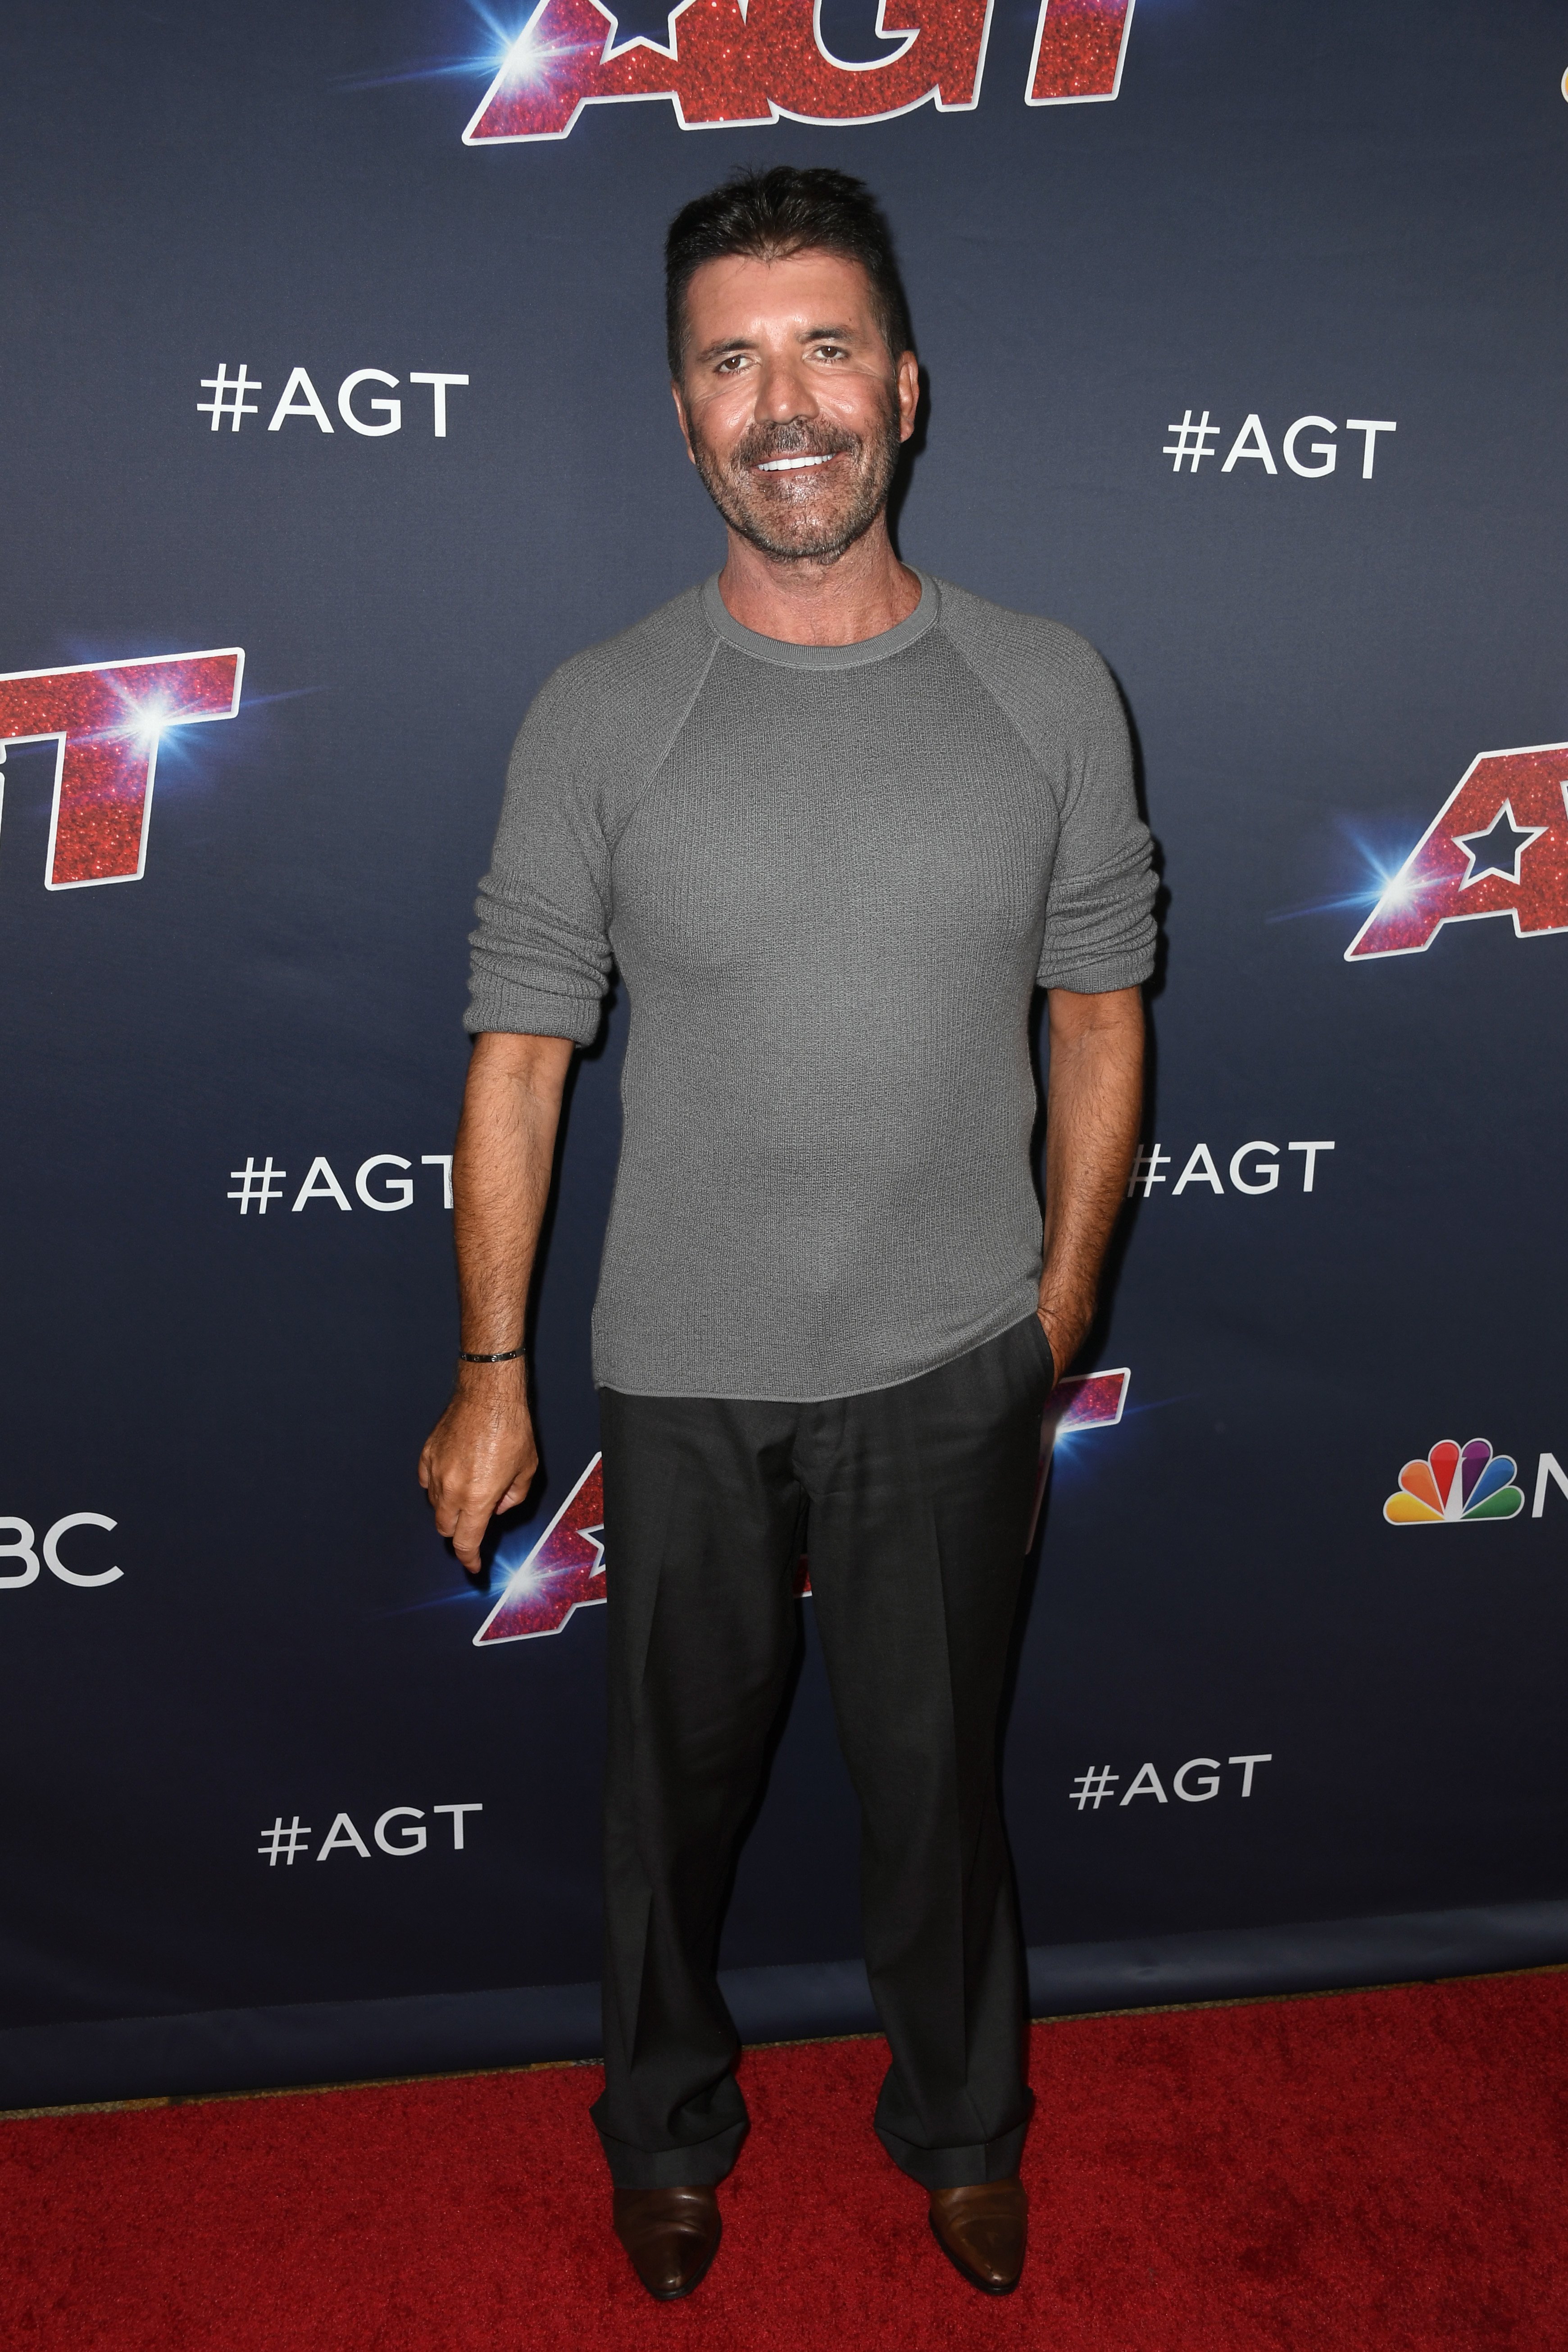 Simon Cowell at the "America's Got Talent" Season 14 Live Show at Dolby Theatre on August 13, 2019 in Hollywood, California | Photo: Getty Images